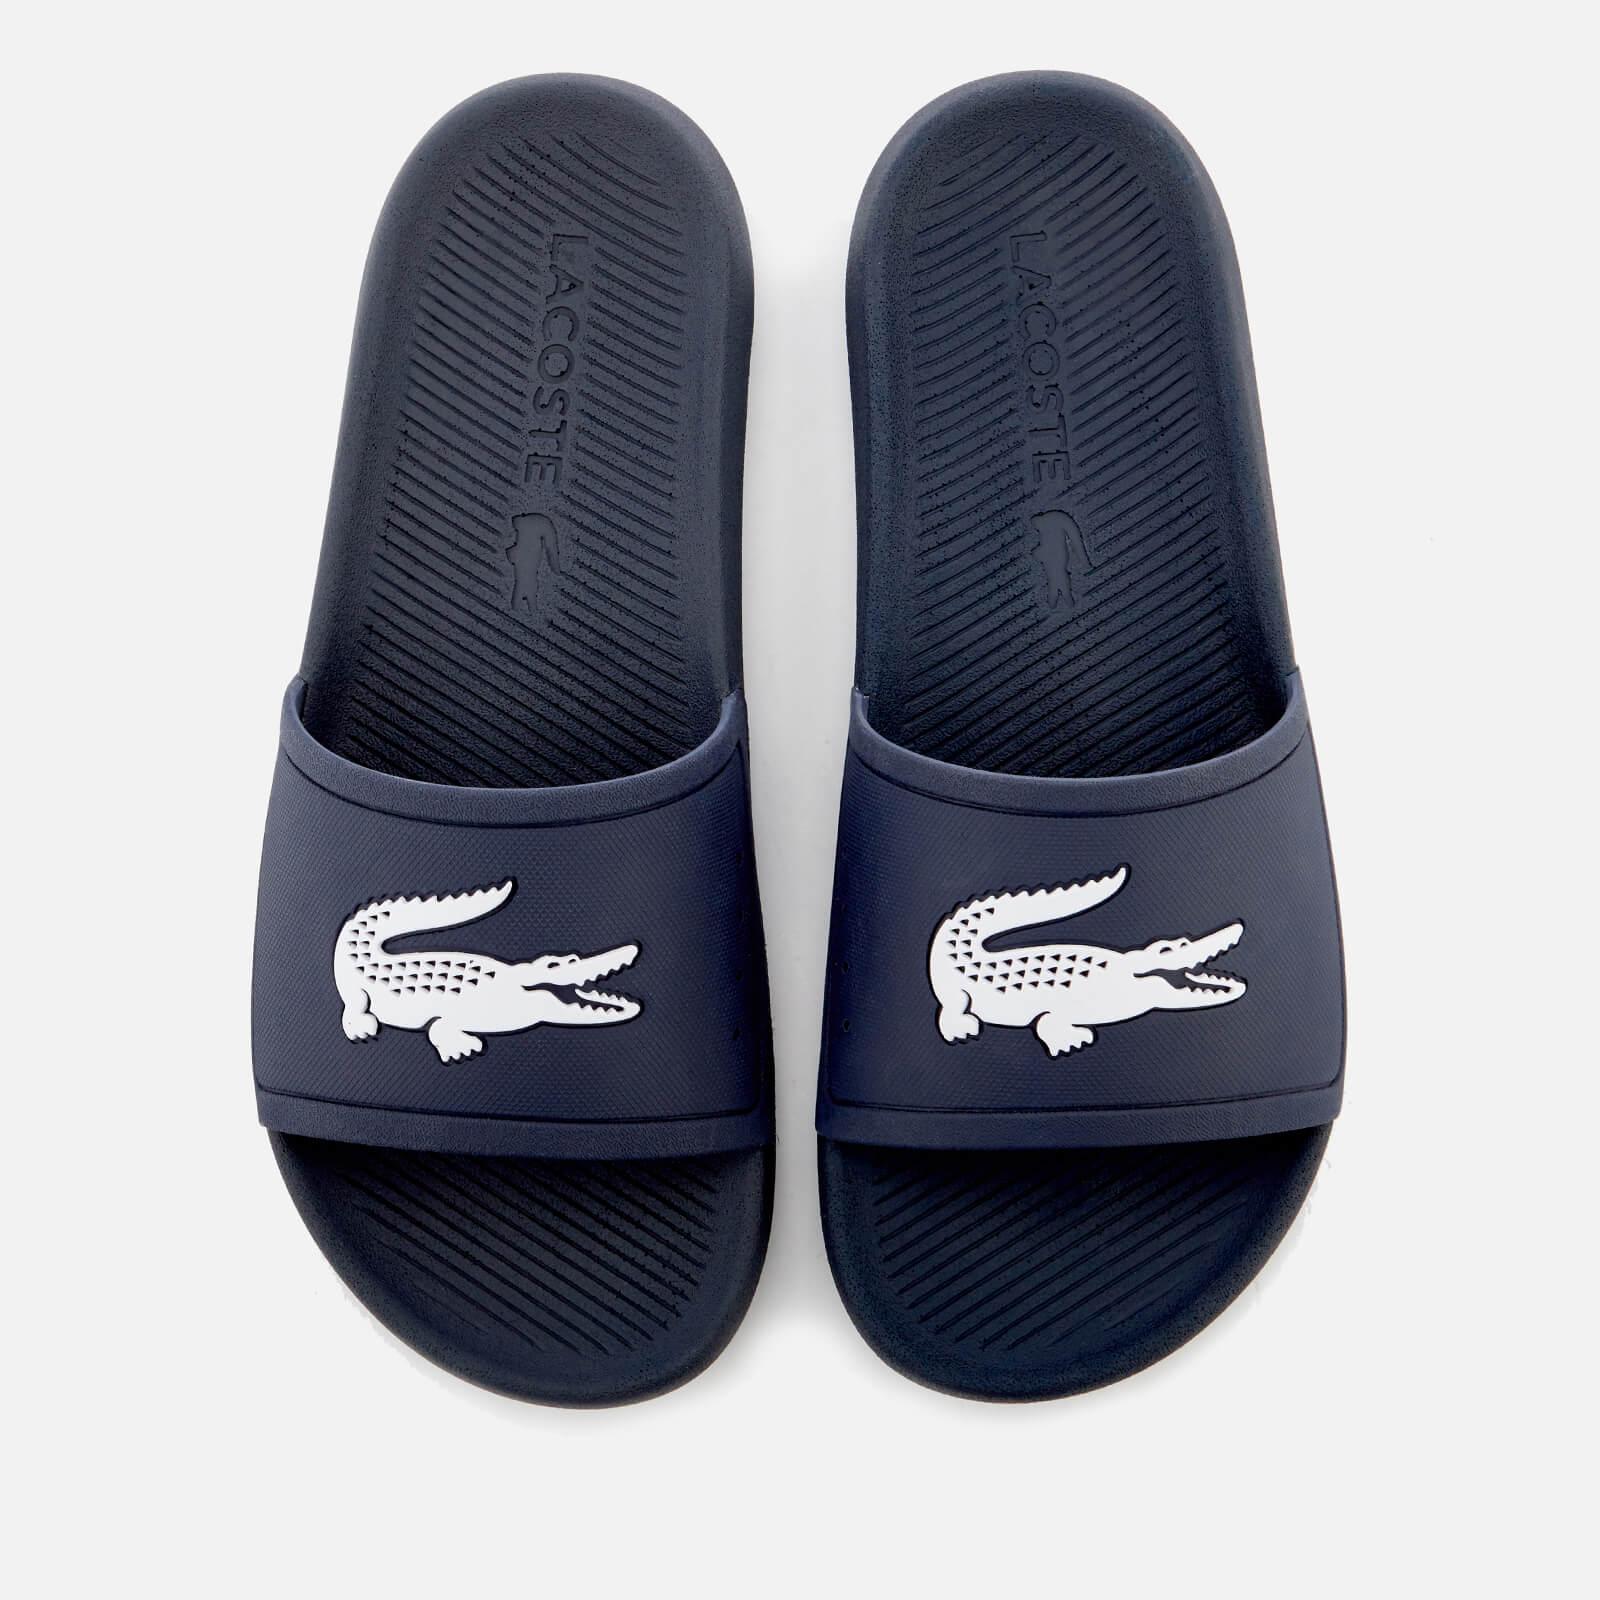 comfy house slippers mens